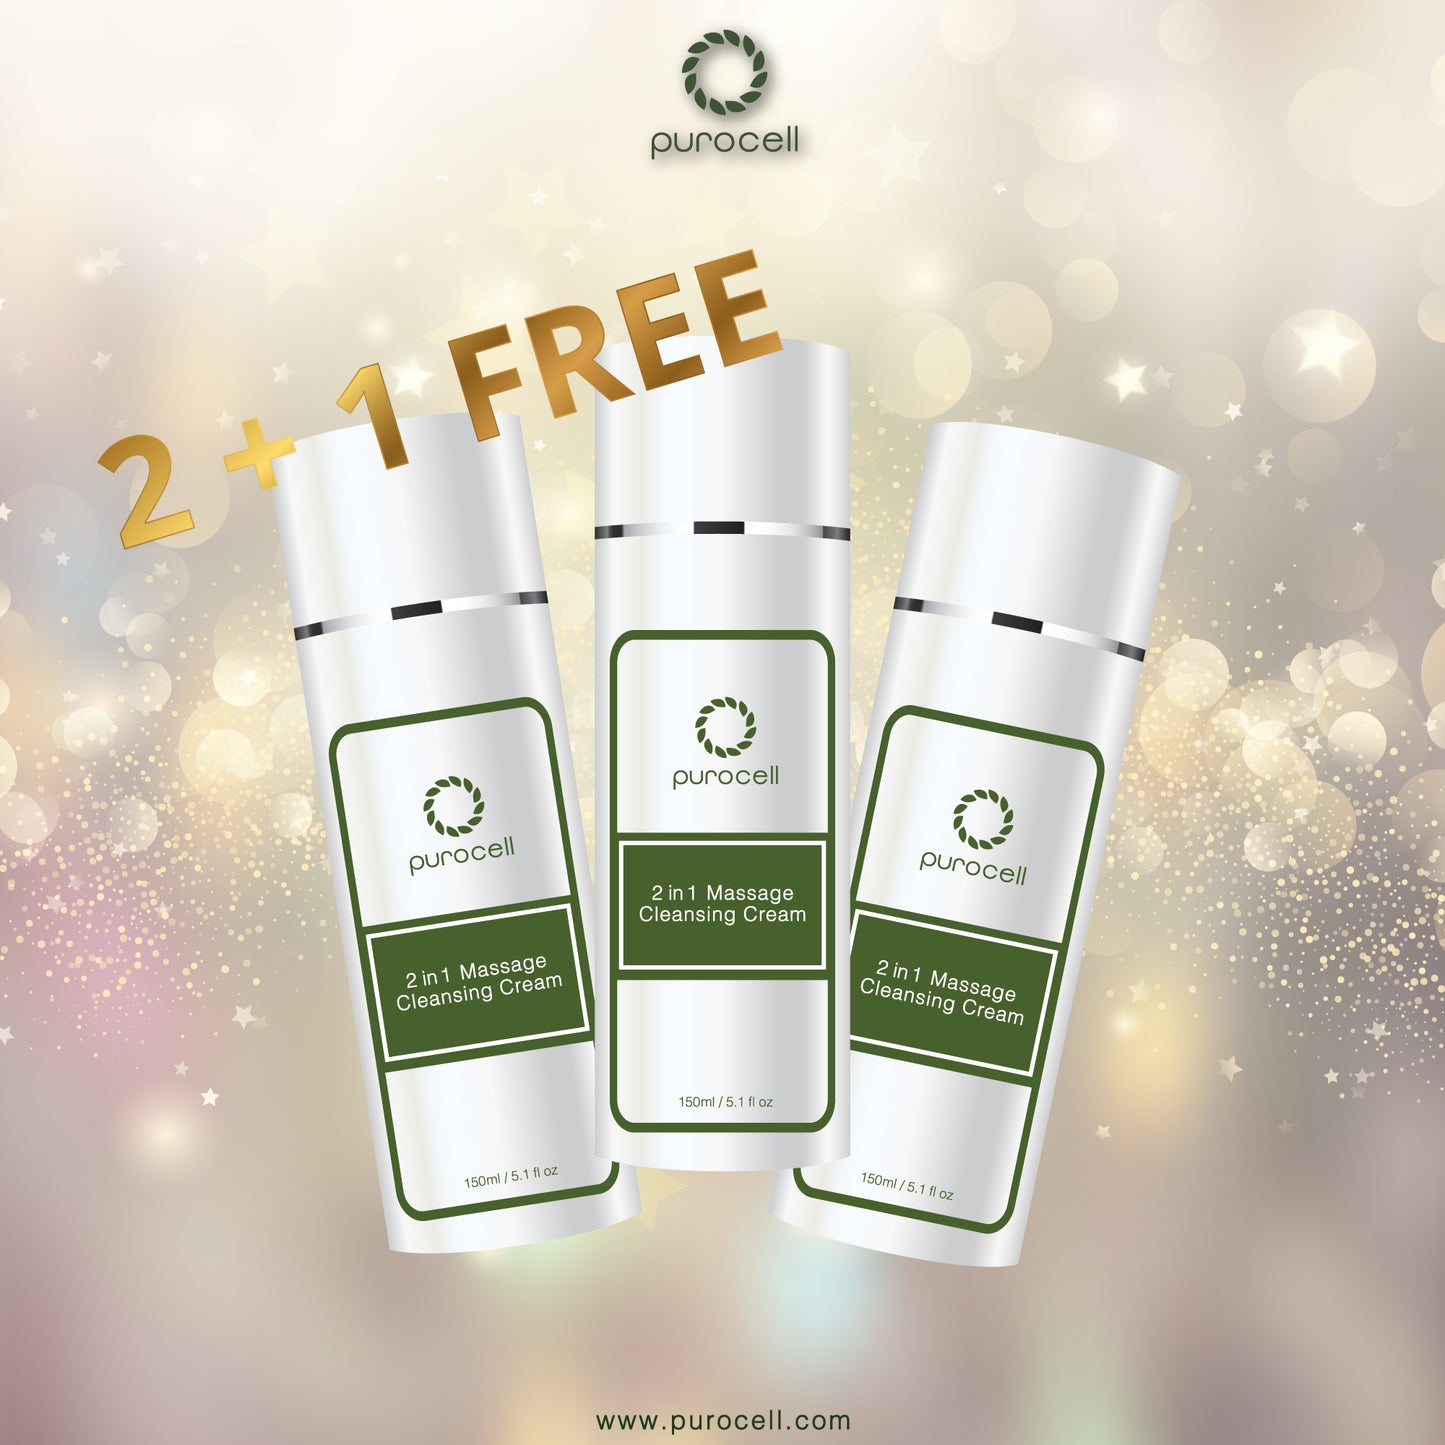 Buy 2 Get 1 Free 2 in 1 Massage Cleansing Cream